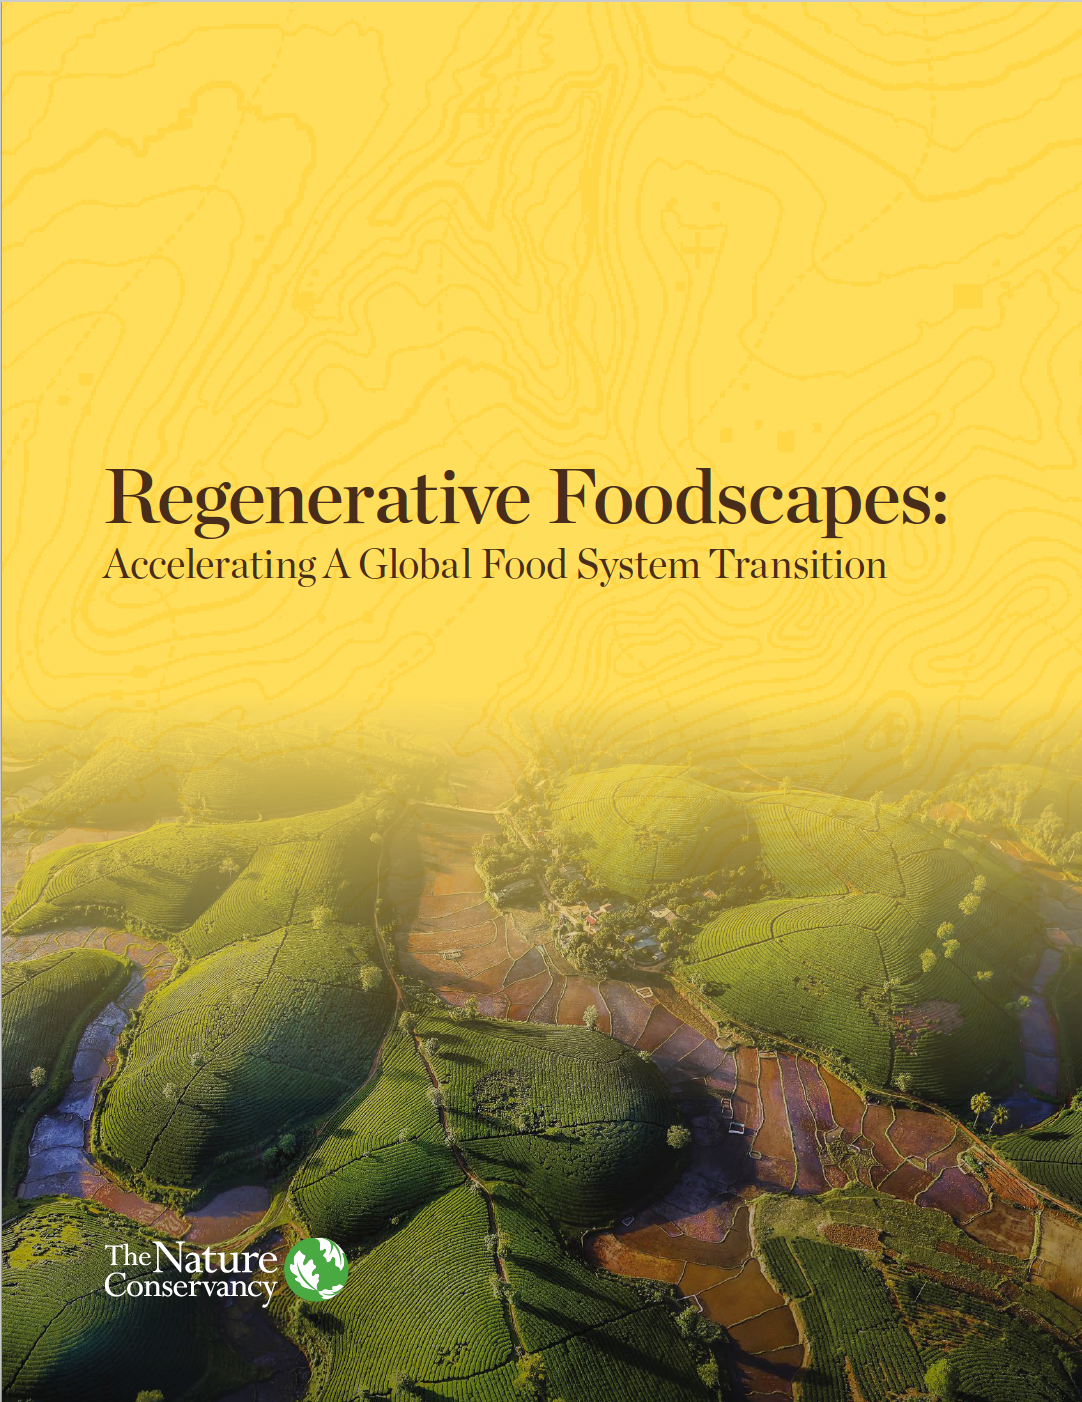 the cover of the Foodscapes Acceleration Guide